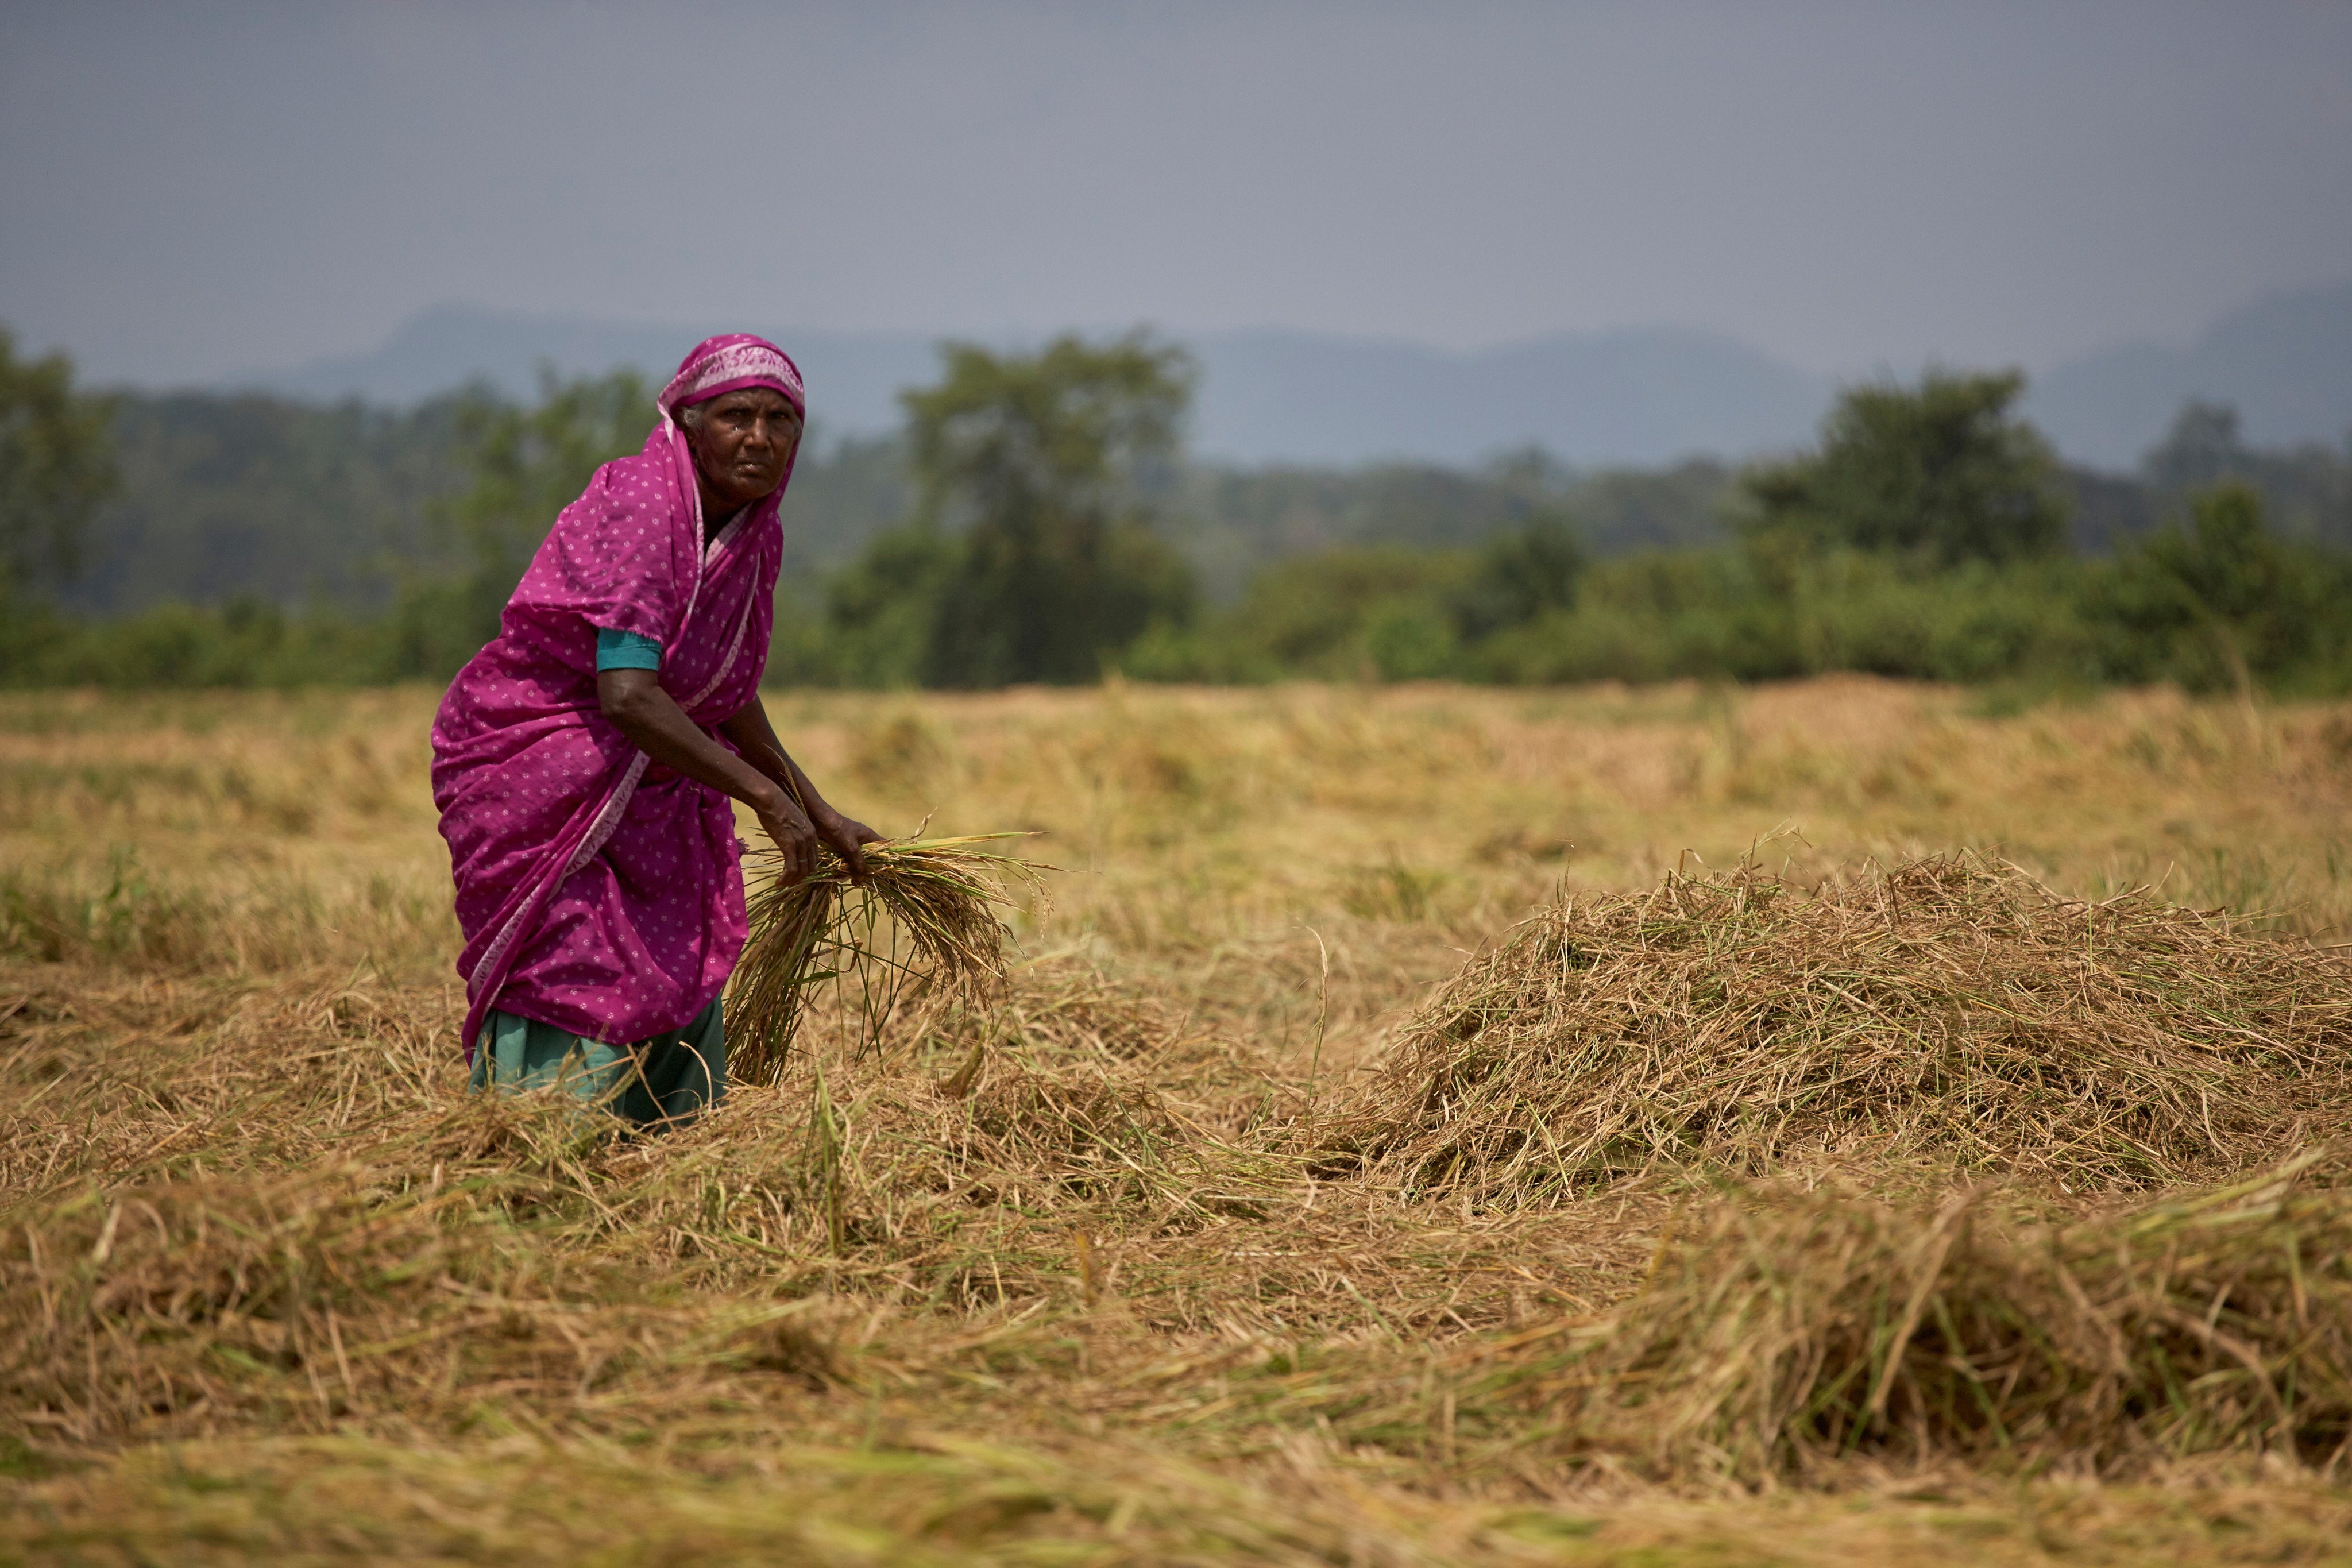 A woman works at a paddy field in Ampara, Sri Lanka, on March 15, 2010. Photo: Shutterstock